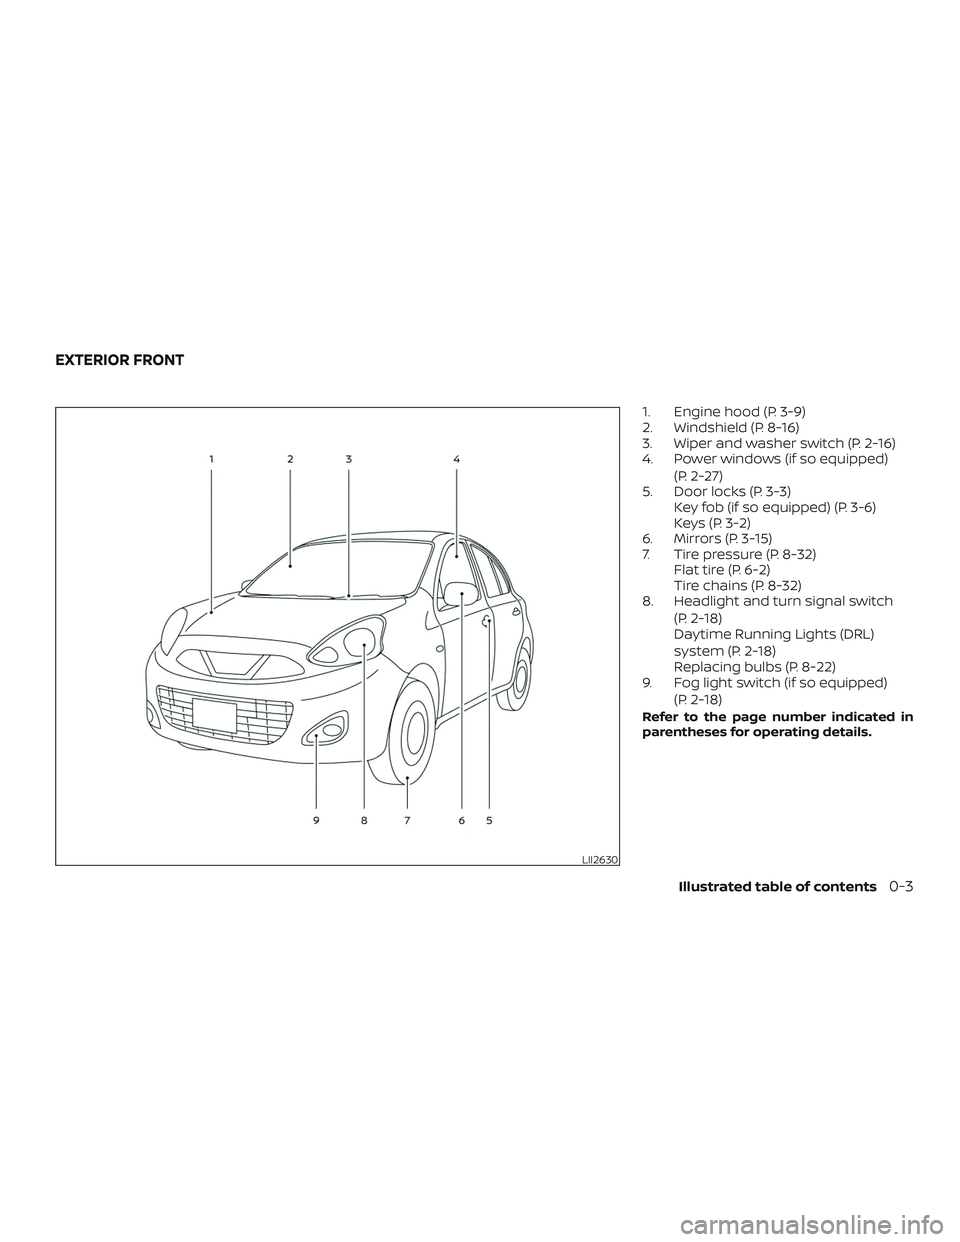 NISSAN MICRA 2023  Owners Manual 1. Engine hood (P. 3-9)
2. Windshield (P. 8-16)
3. Wiper and washer switch (P. 2-16)
4. Power windows (if so equipped)(P. 2-27)
5. Door locks (P. 3-3) Key fob (if so equipped) (P. 3-6)
Keys (P. 3-2)
6